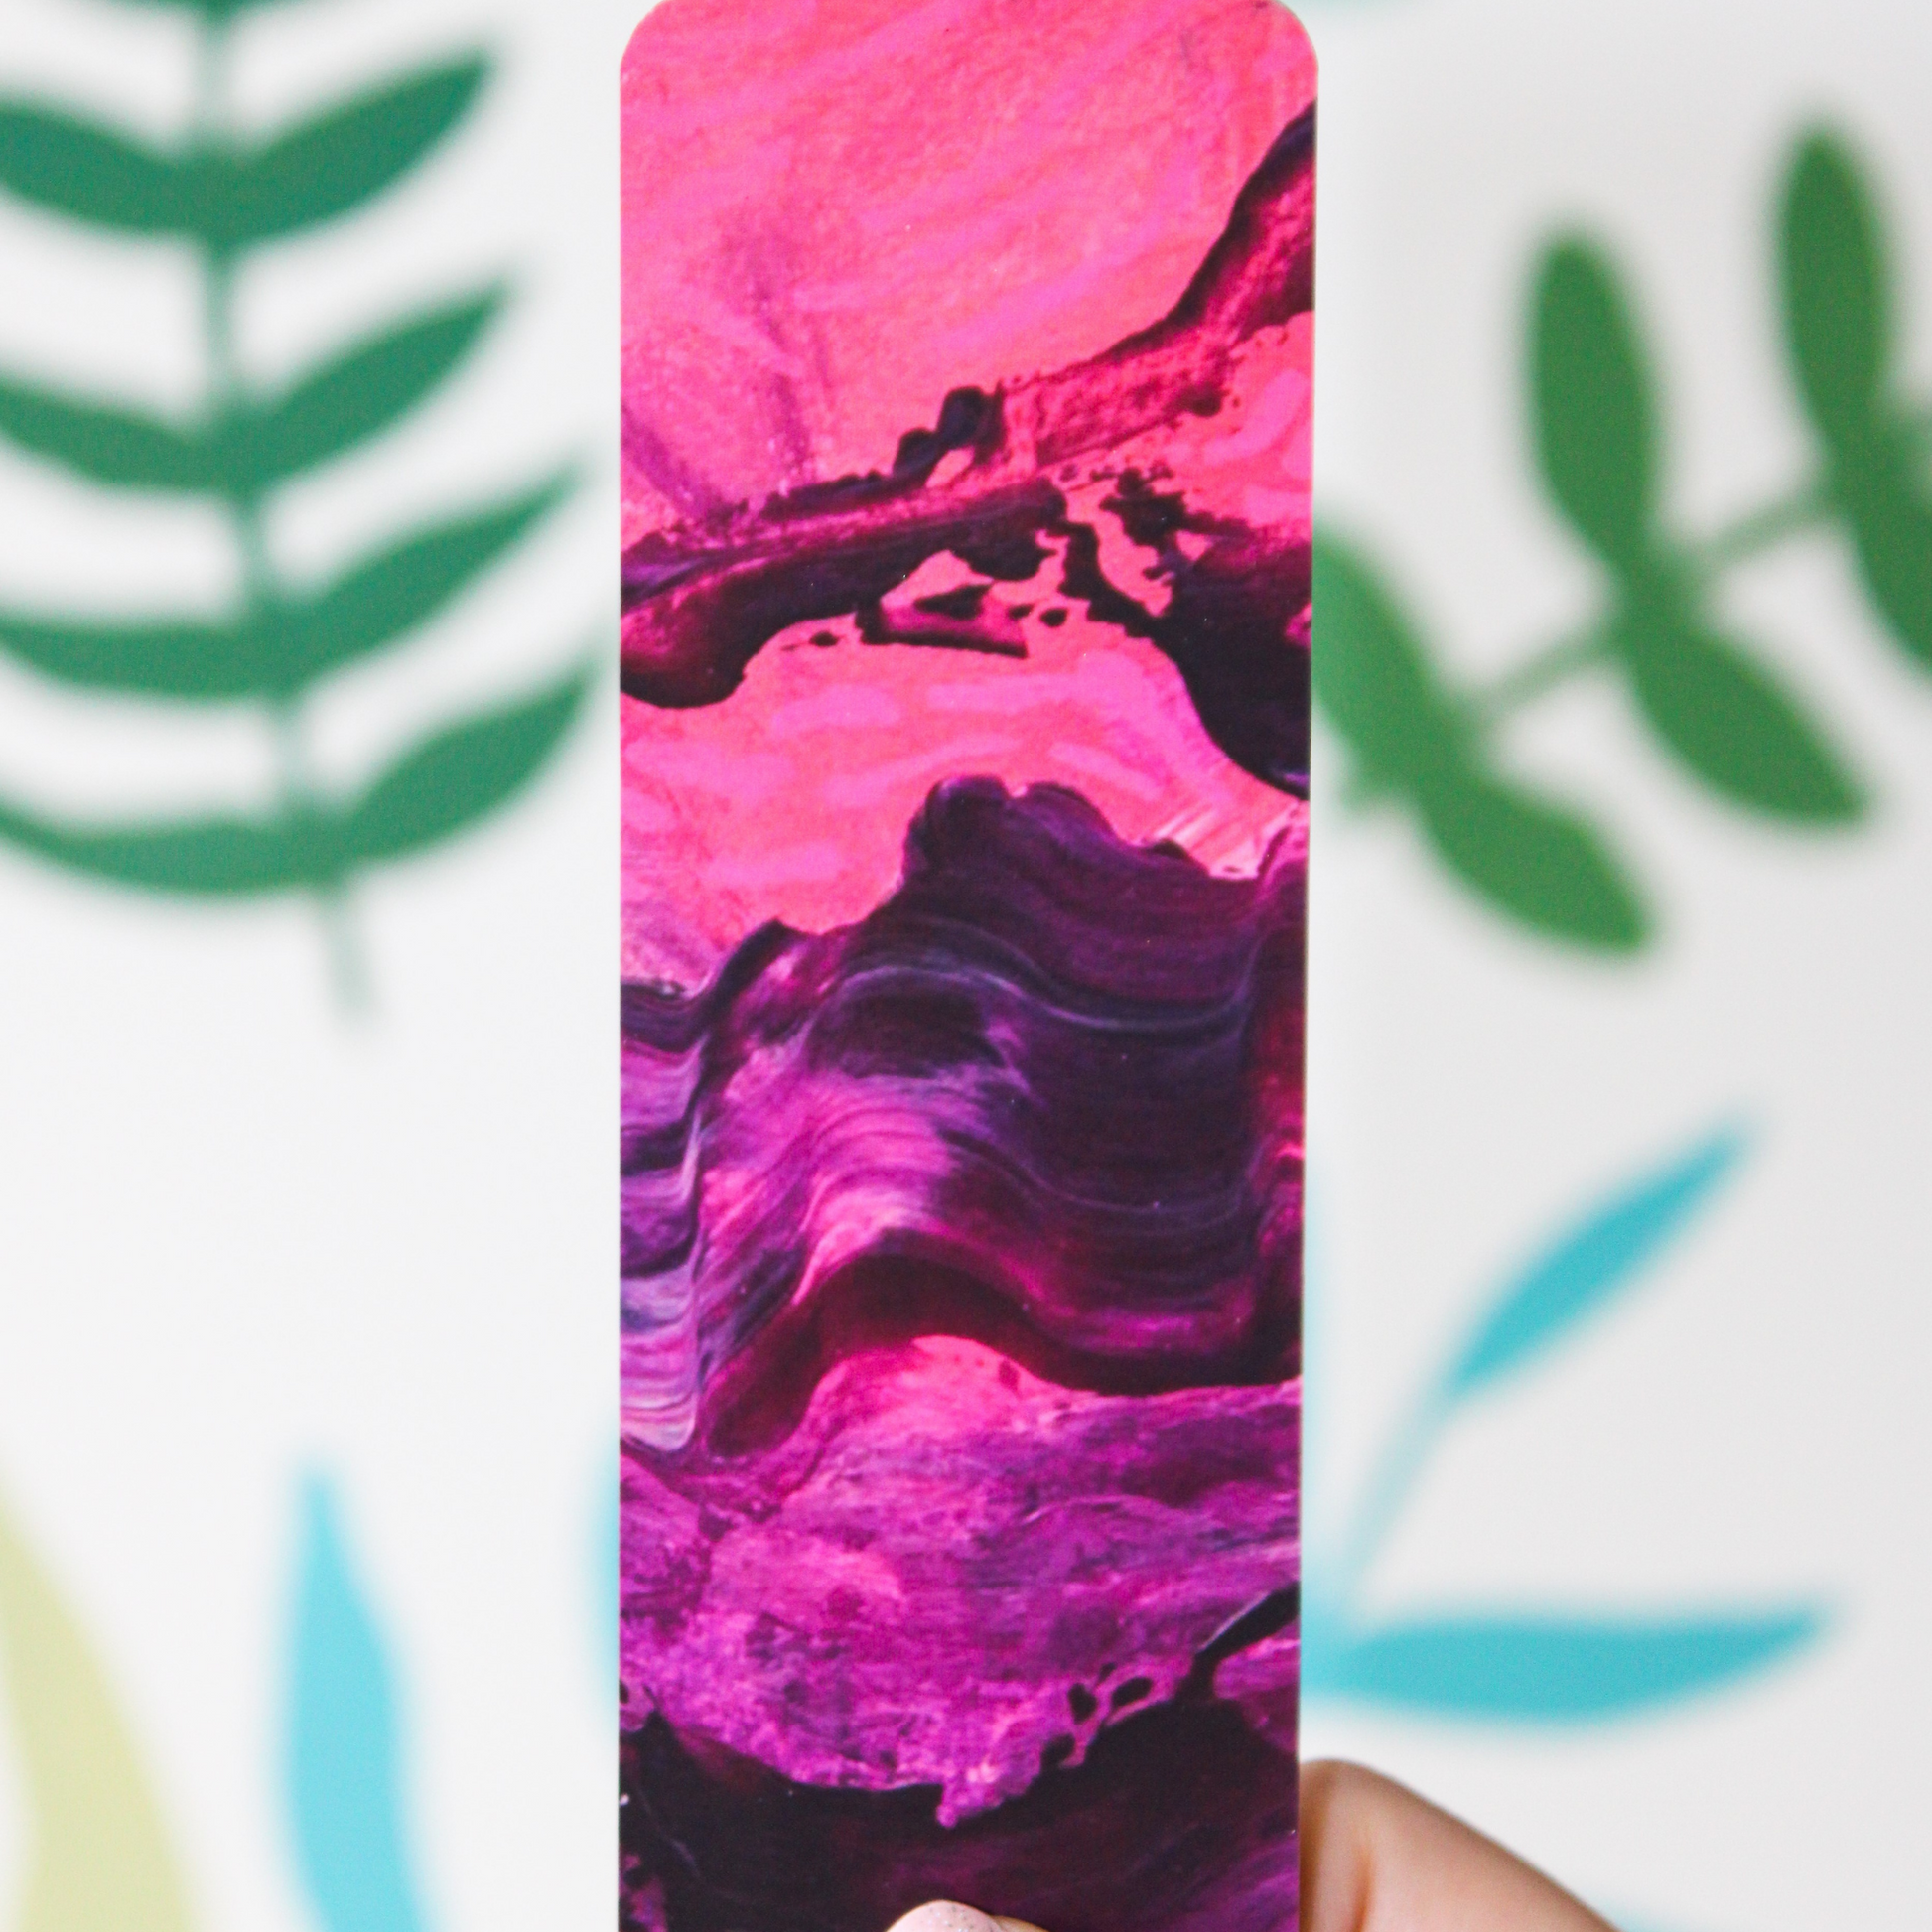 A picture of a pink and purple abstract bookmark with bright pink and the top turning into purple on the bottom. The background is a blurred leaf pattern.